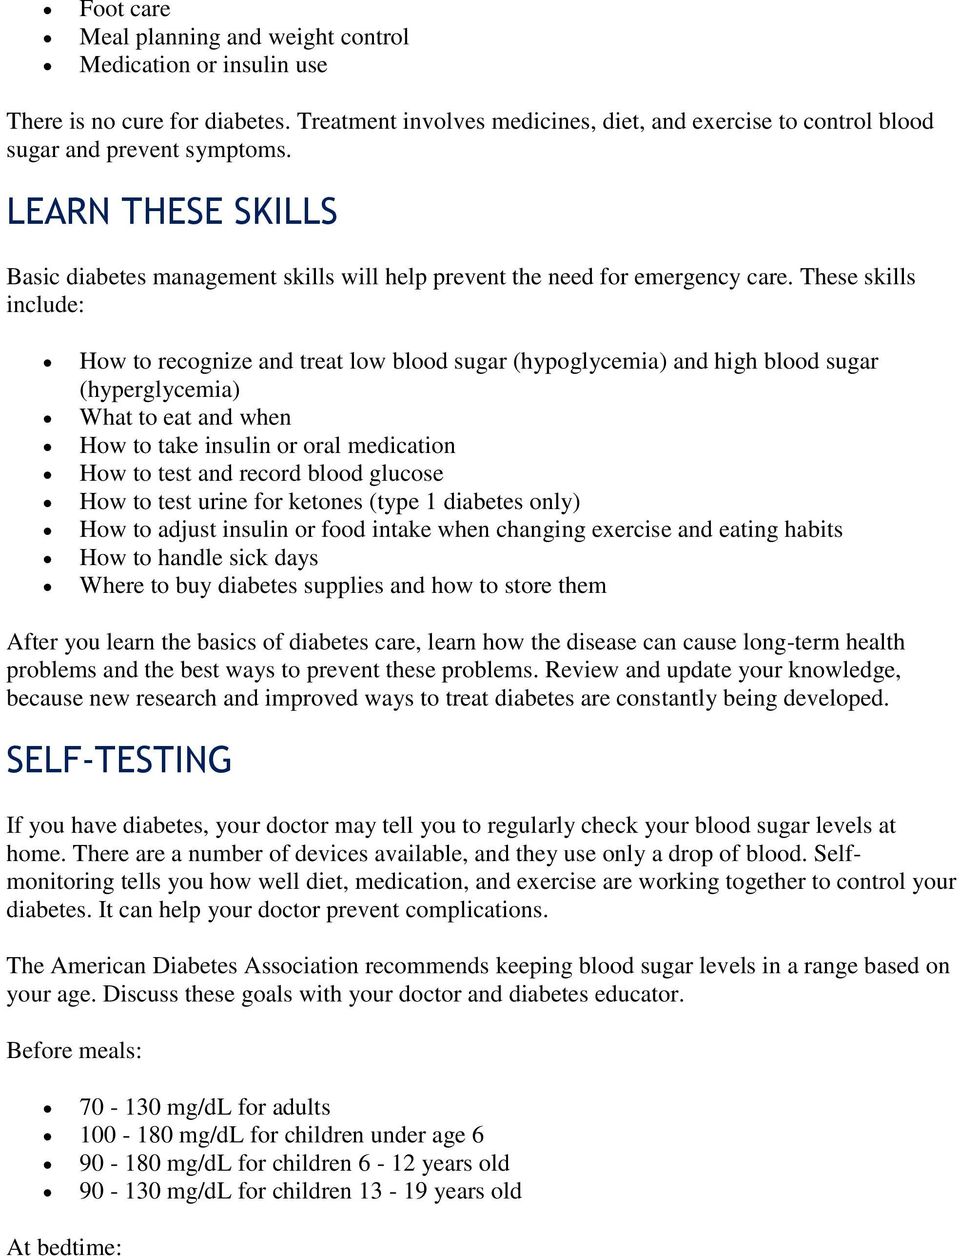 These skills include: How to recognize and treat low blood sugar (hypoglycemia) and high blood sugar (hyperglycemia) What to eat and when How to take insulin or oral medication How to test and record